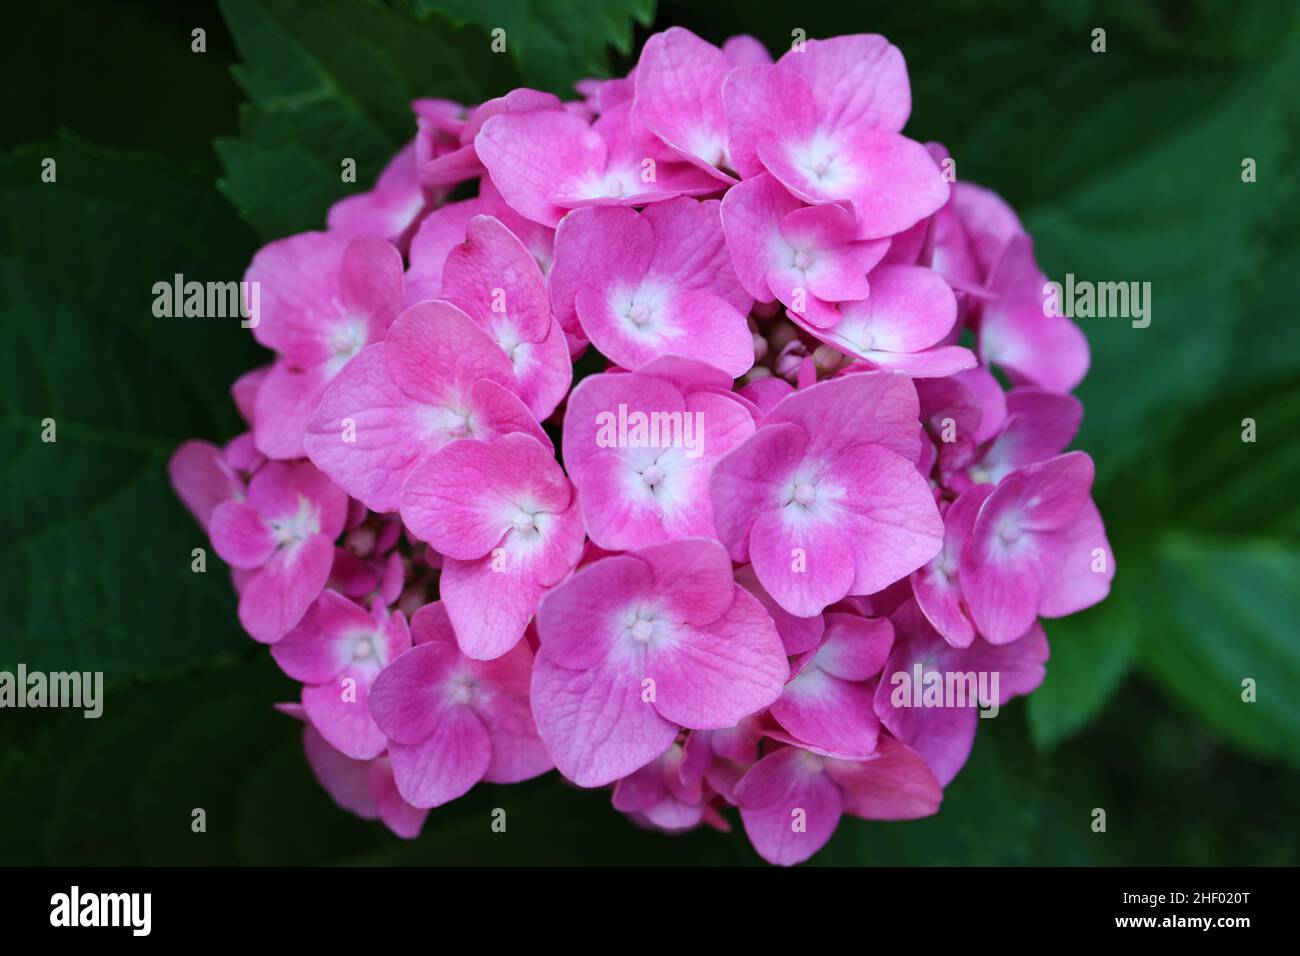 Pink Hydrangea with delicate petals and green leaves, Hydrangea in the garden , flower head, beauty in nature, blooming hydrangea macro, floral photo, Stock Photo